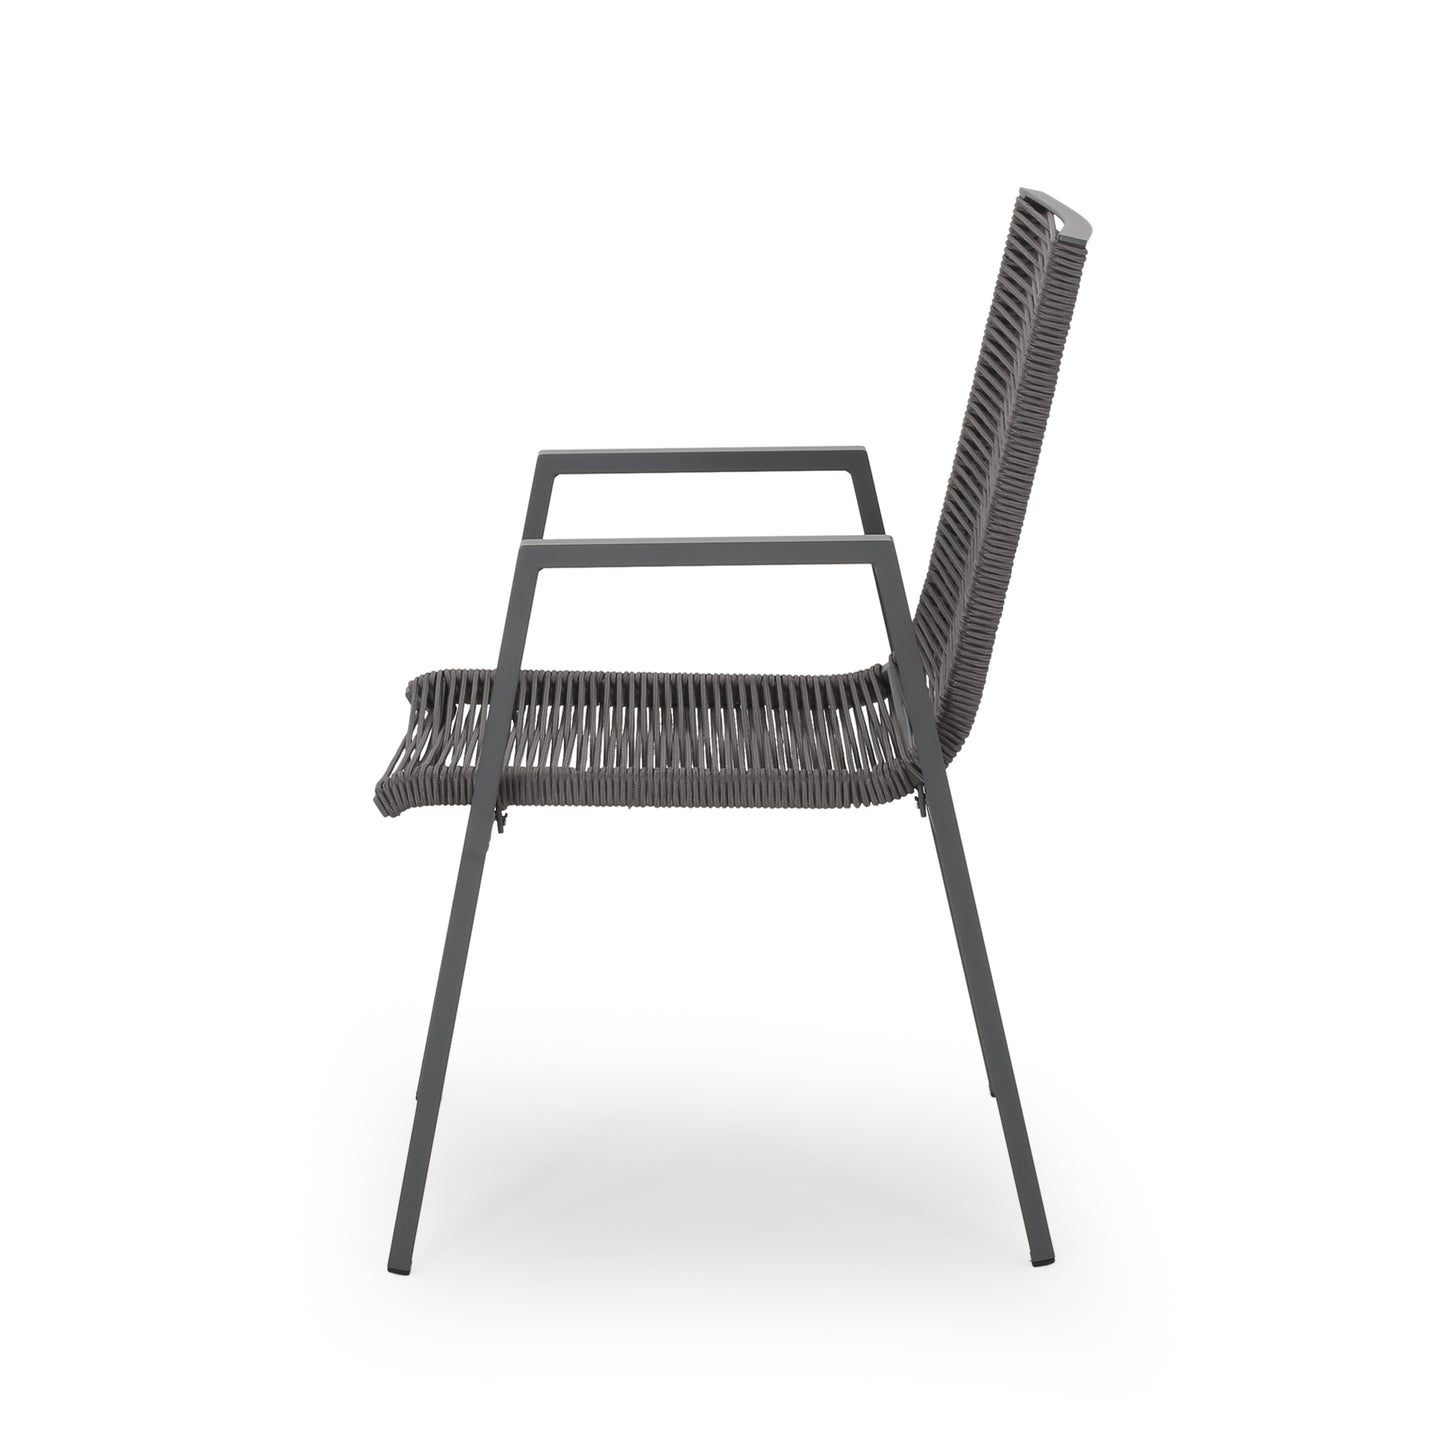 Kalli Outdoor Modern Aluminum Dining Chair with Rope Seat (Set of 2)